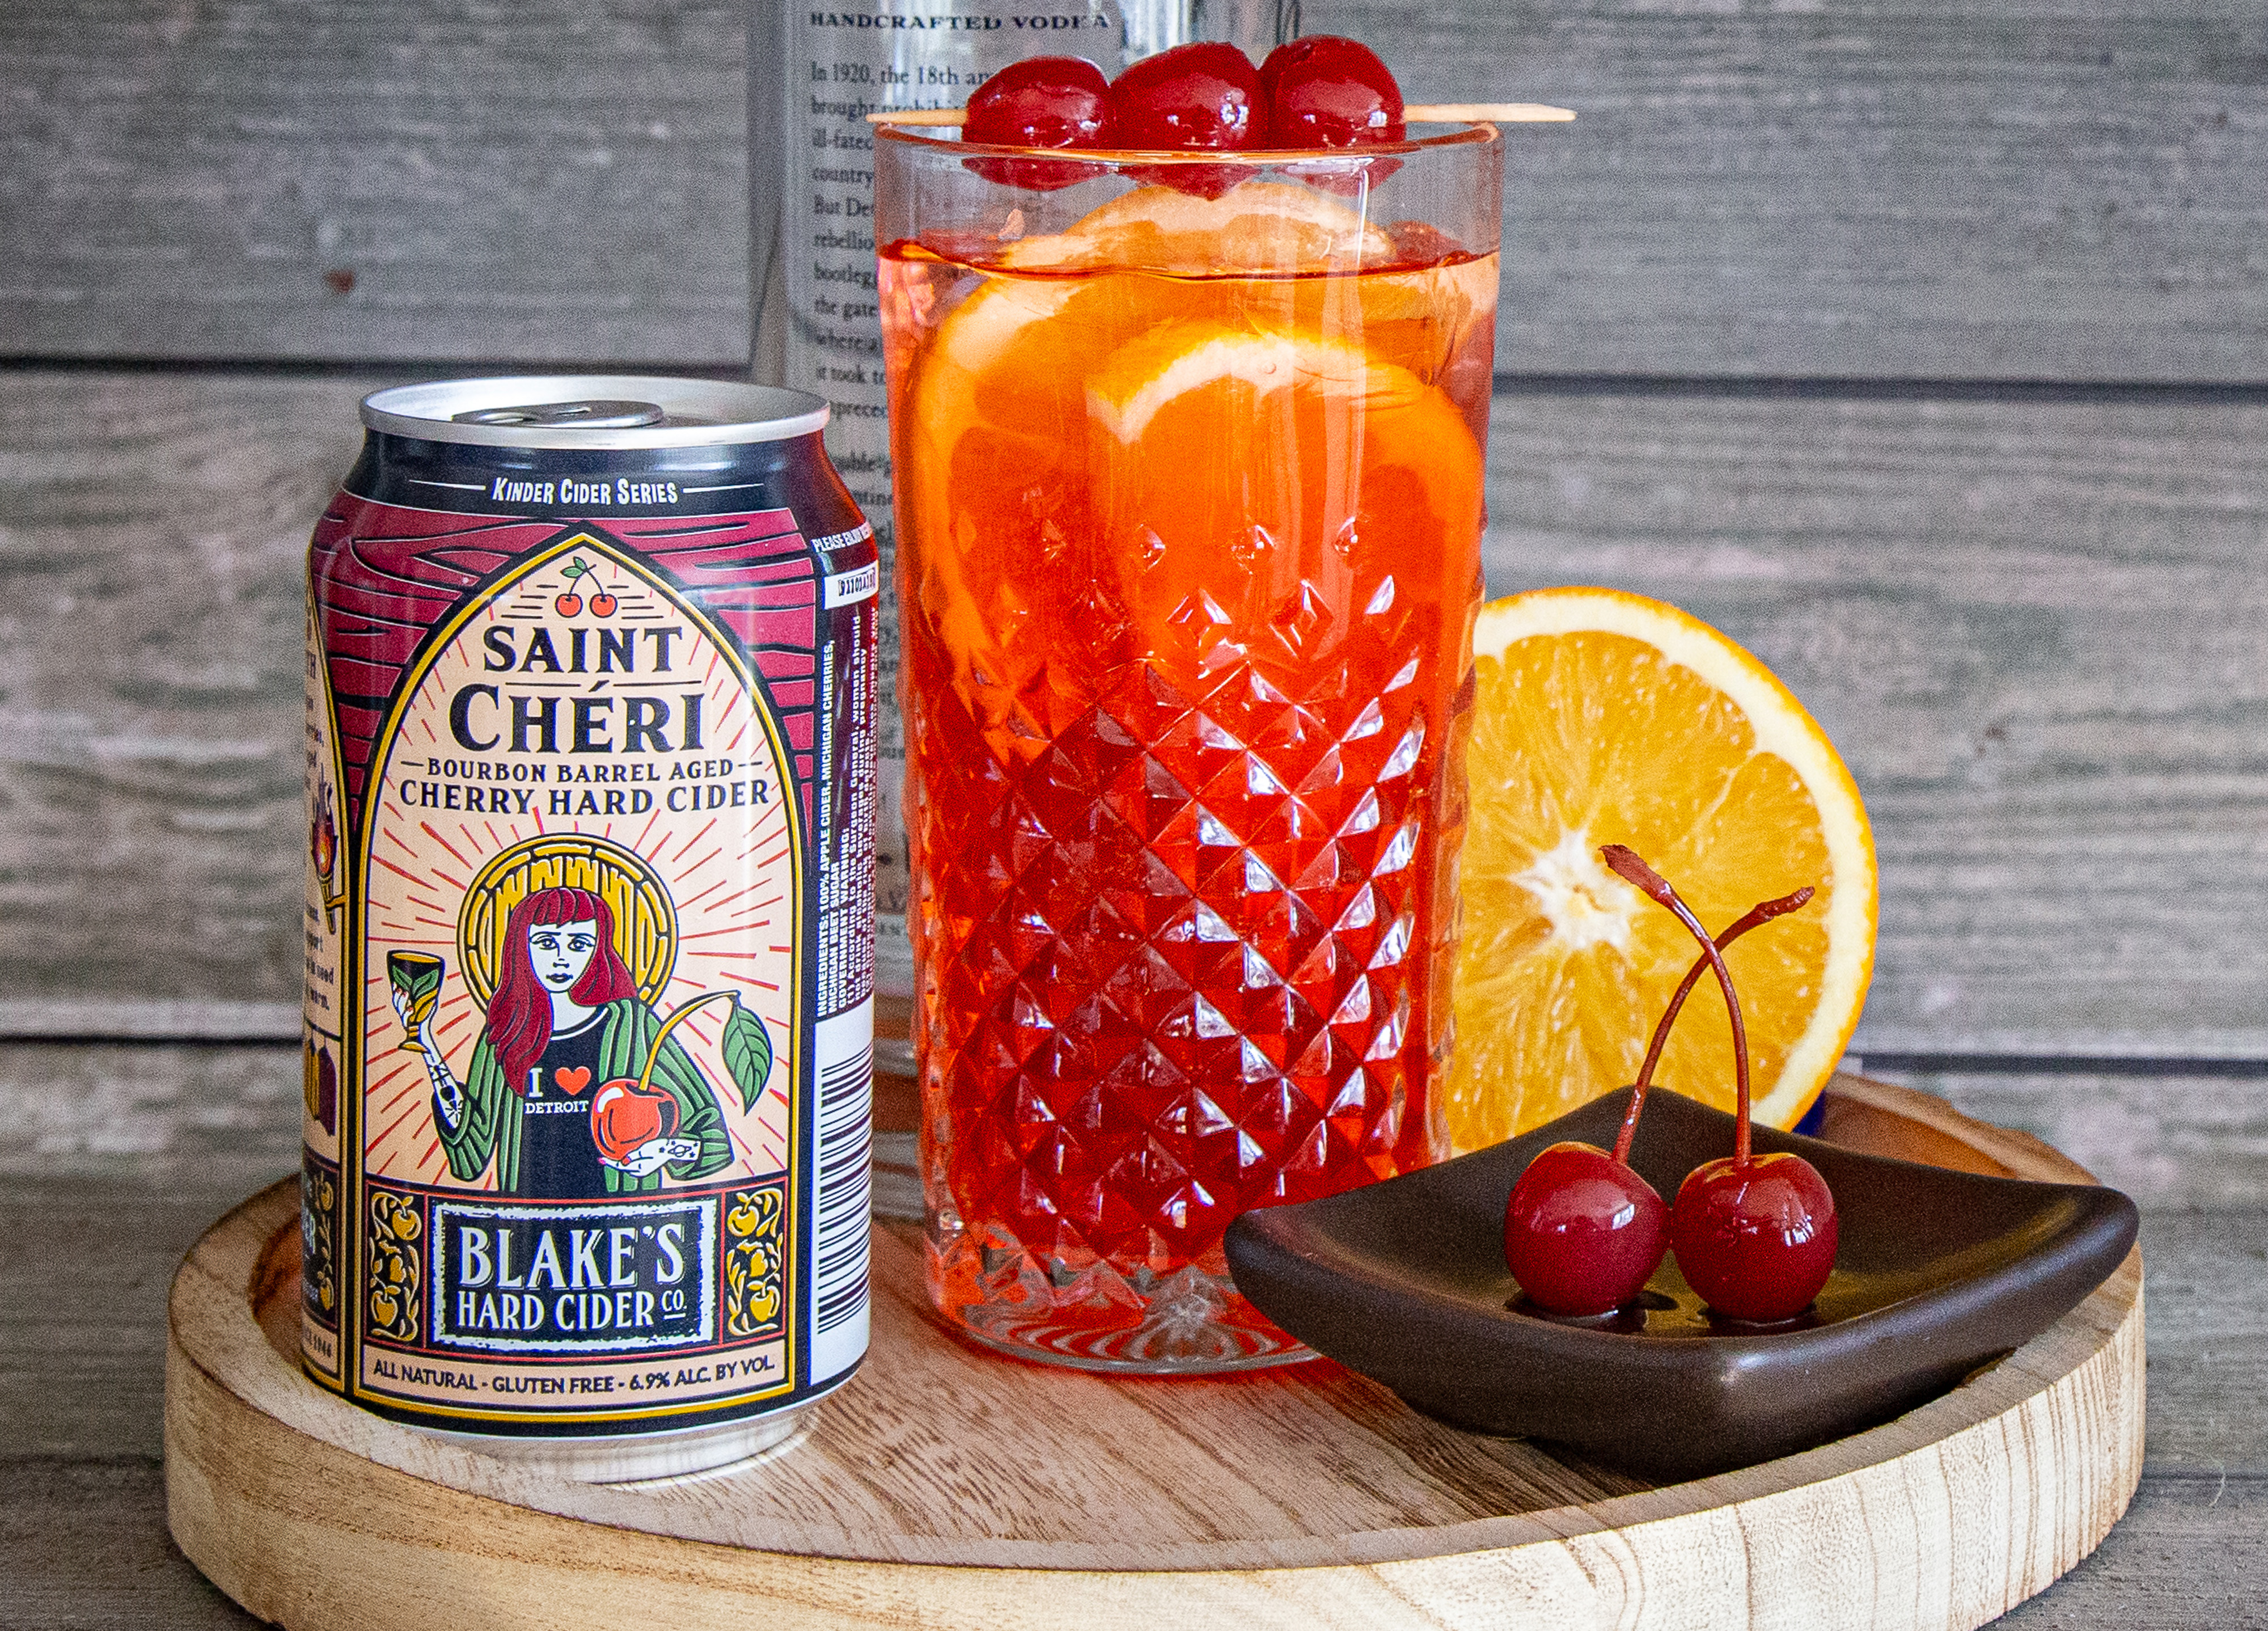 Saint Cheri cider in a red can next to a glass of cherry cider and a plate with two maraschino cherries. 